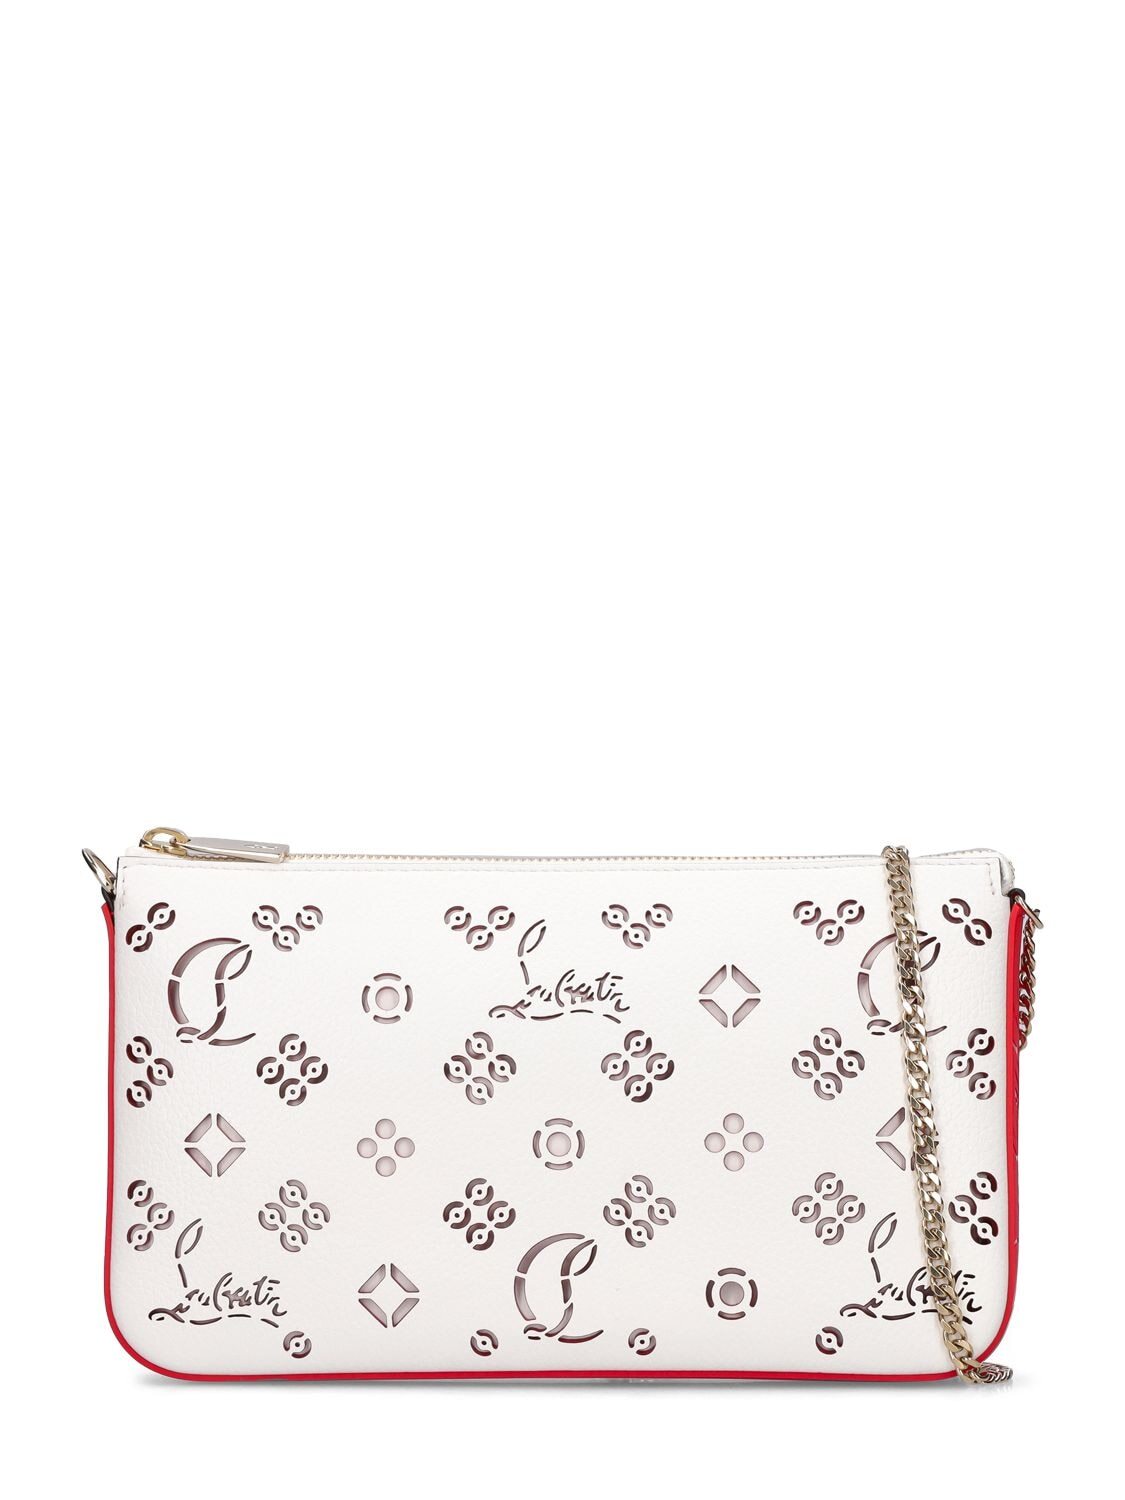 CHRISTIAN LOUBOUTIN Loubila Perforated Leather Shoulder Bag in bianco